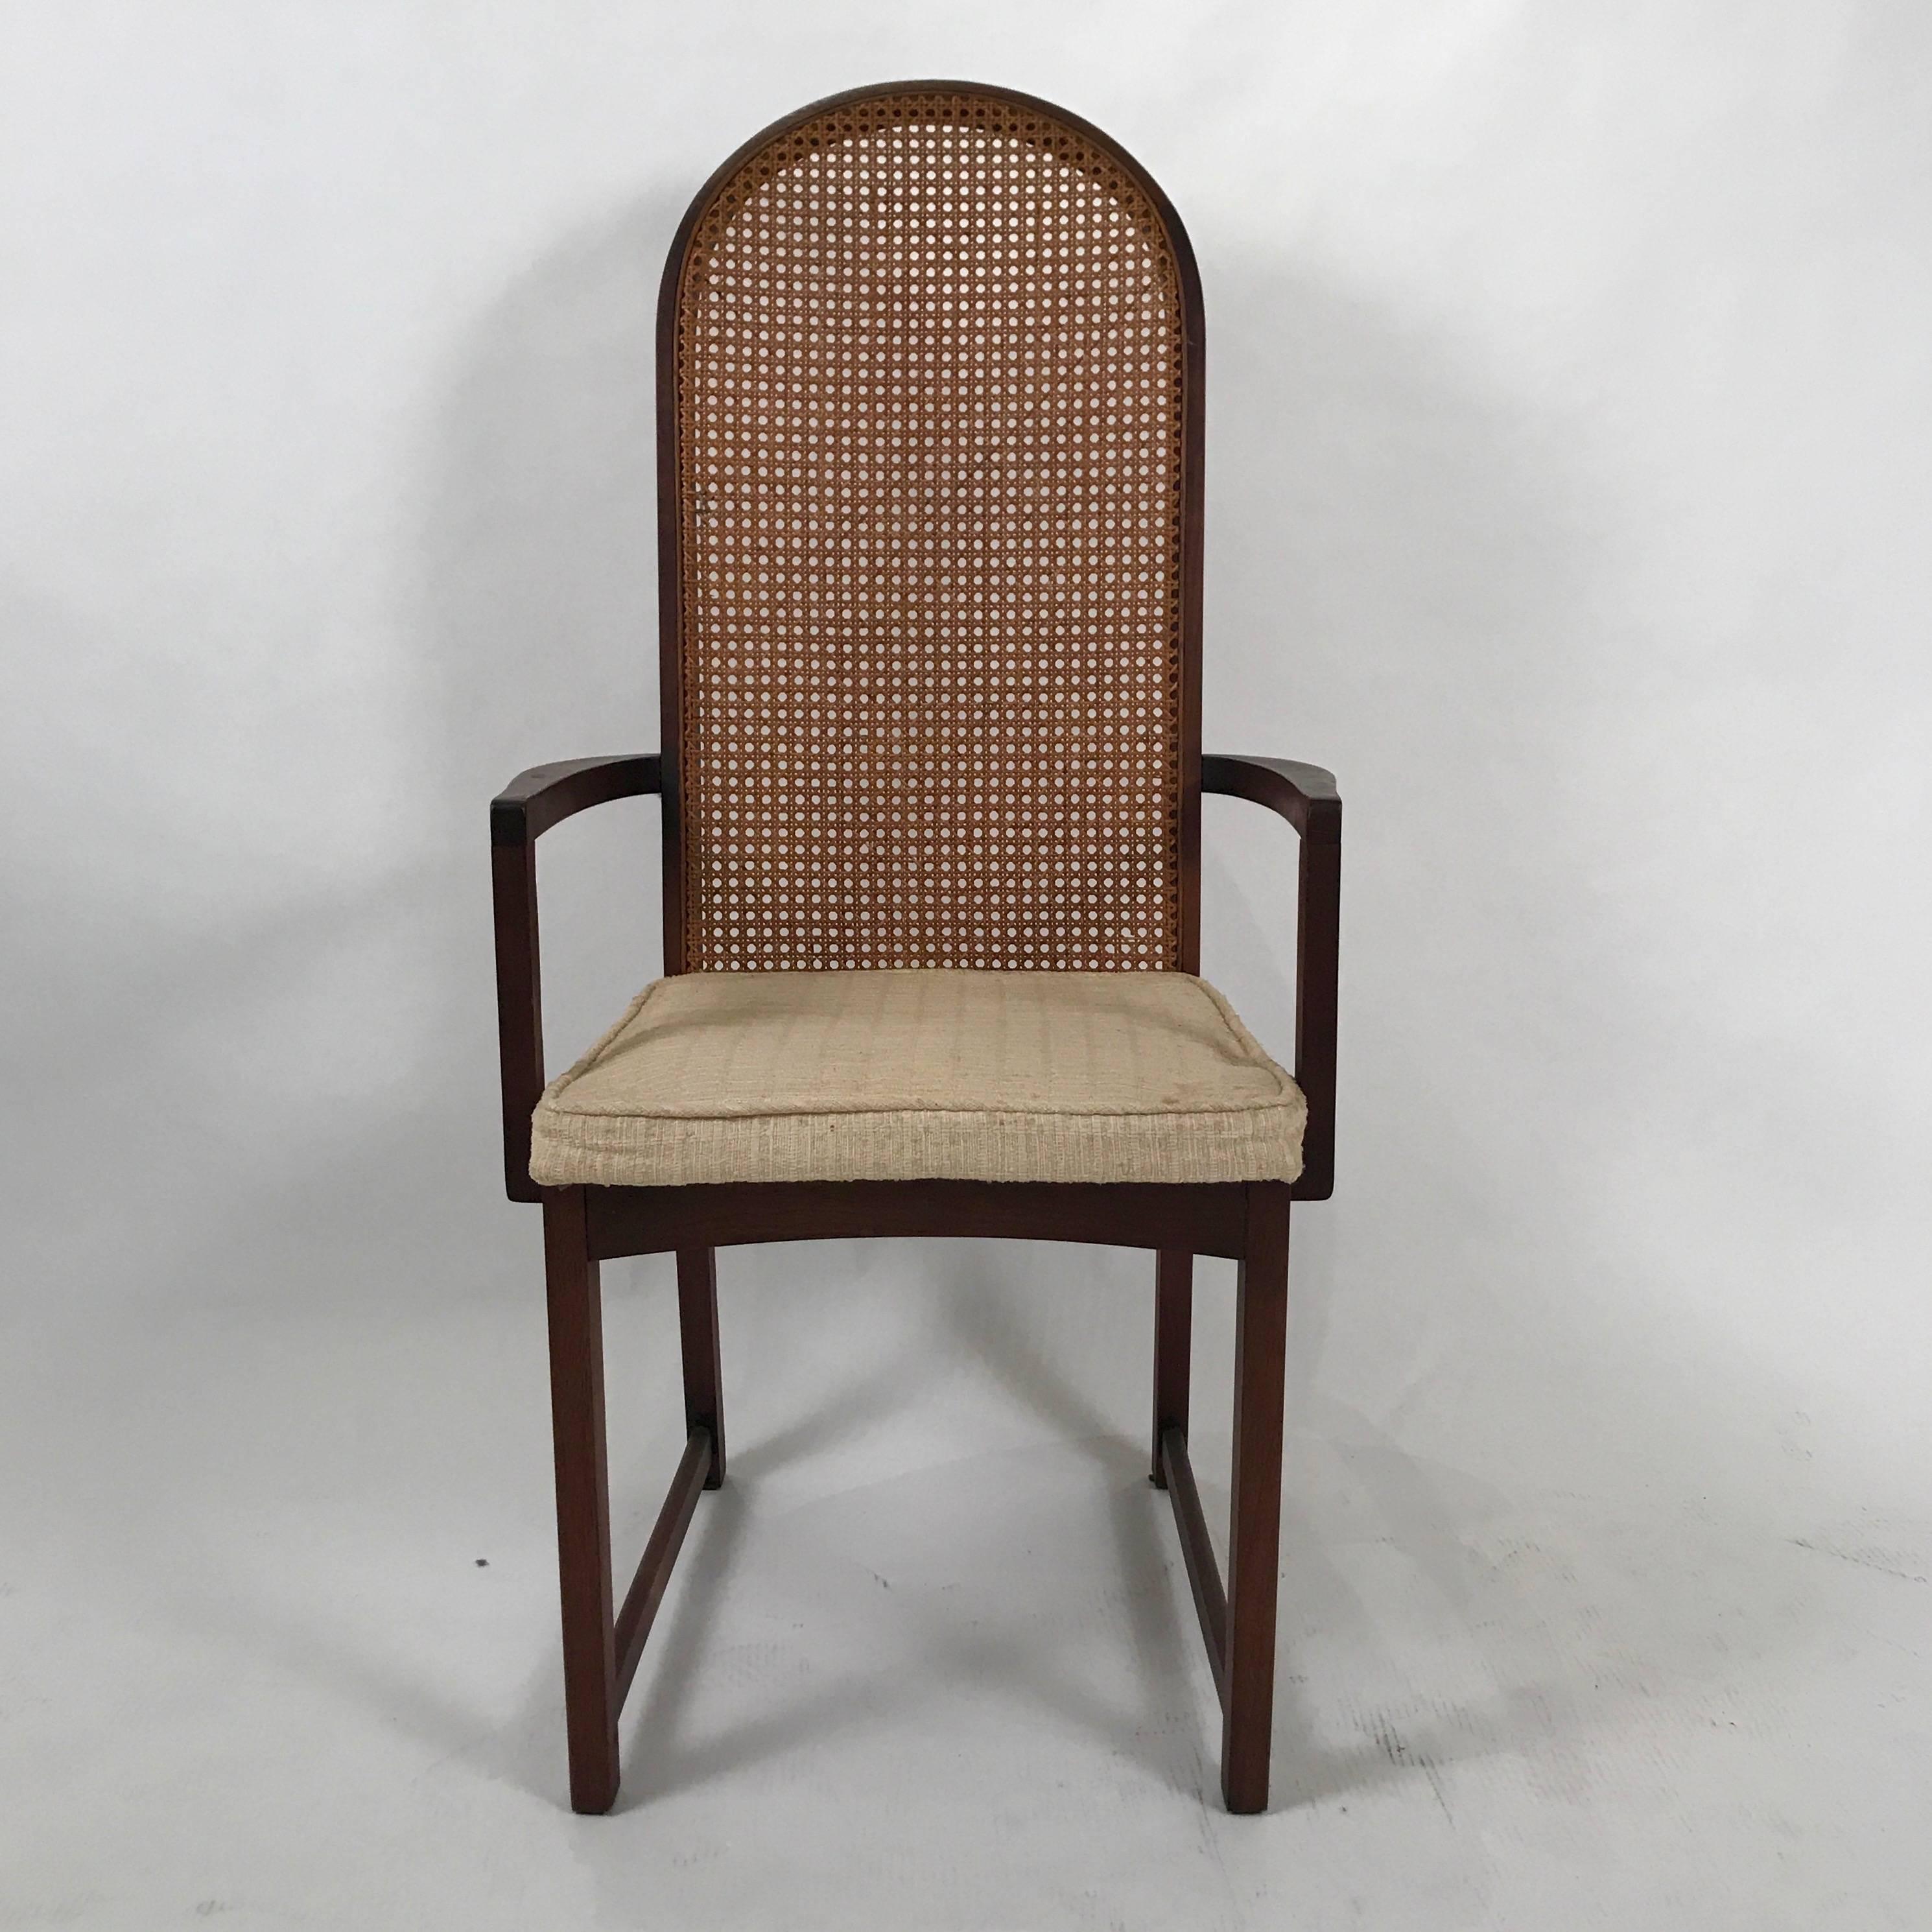 American Set of Six Milo Baughman High Back Cane and Walnut Dining Chairs for Directional